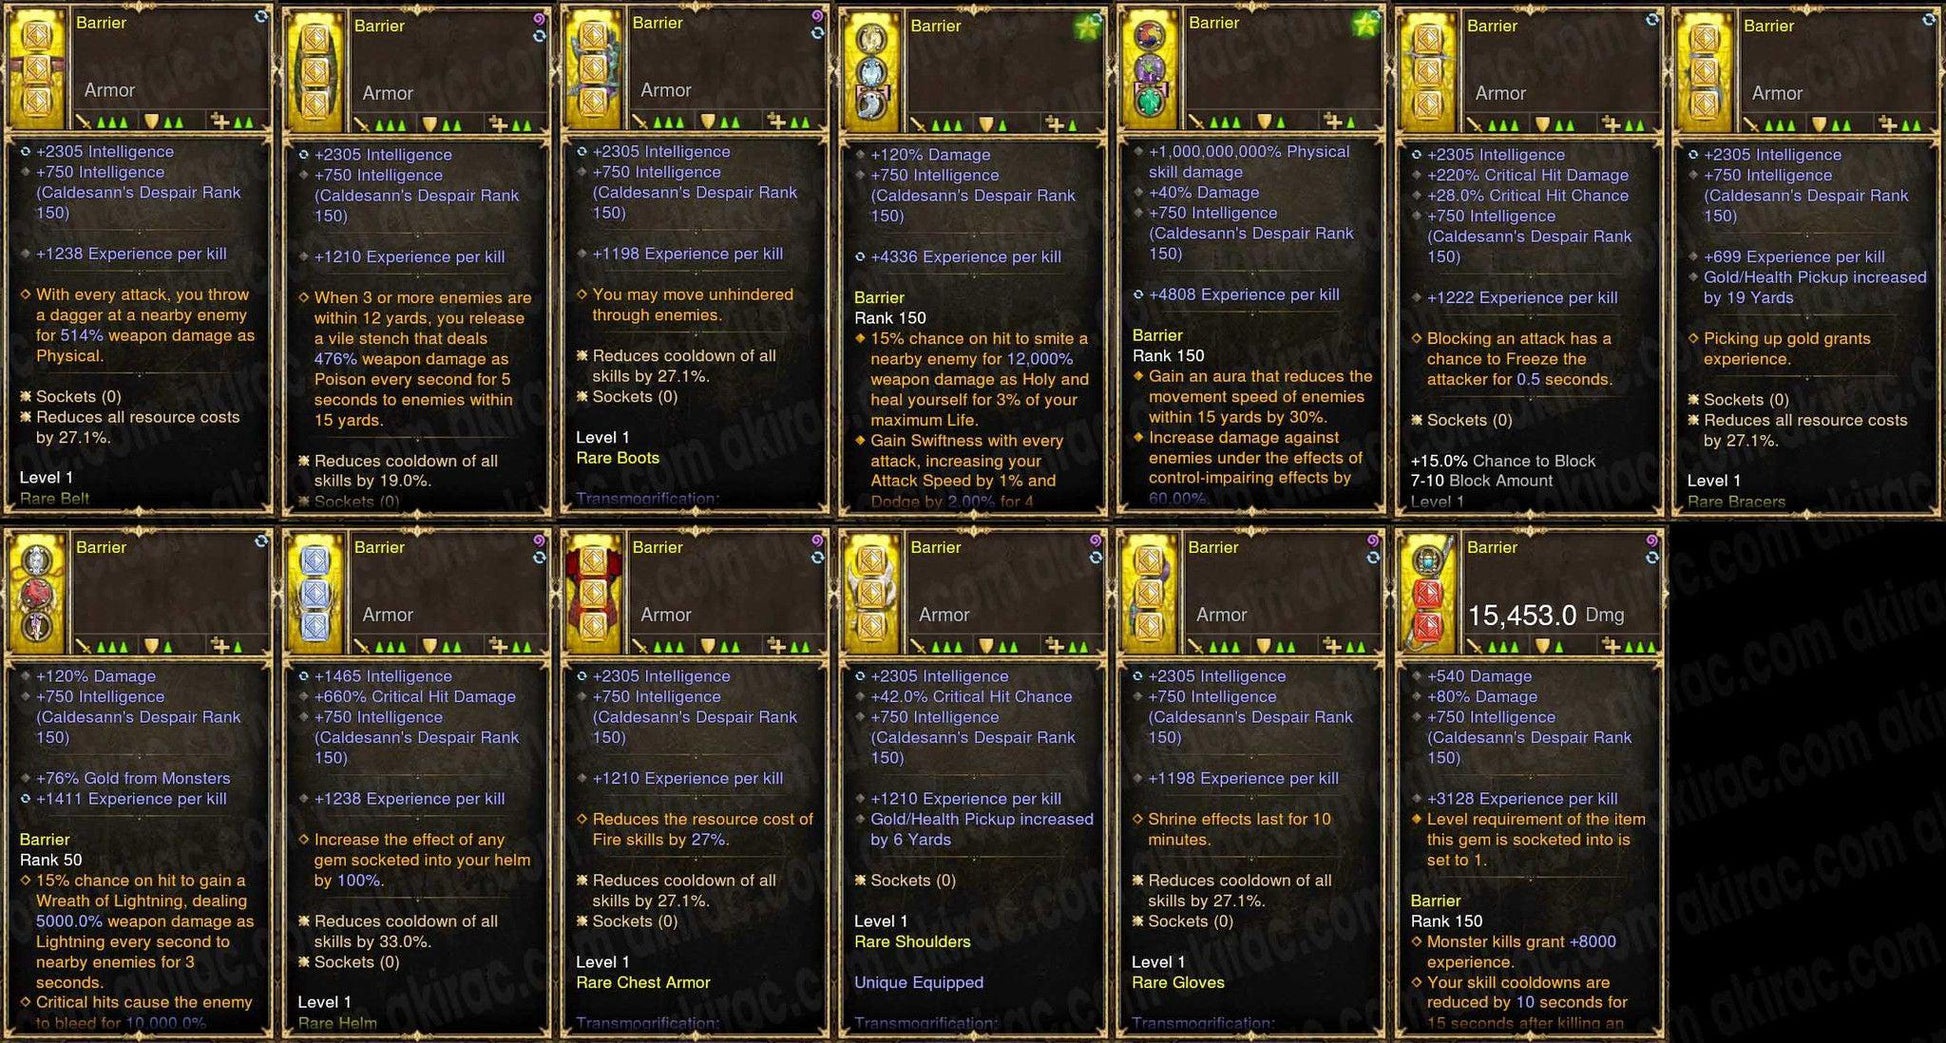 EXP v2 Leveling Set 1-70 Faster (UPDATED: STR, DEX, INT) Diablo 3 Mods ROS Seasonal and Non Seasonal Save Mod - Modded Items and Gear - Hacks - Cheats - Trainers for Playstation 4 - Playstation 5 - Nintendo Switch - Xbox One